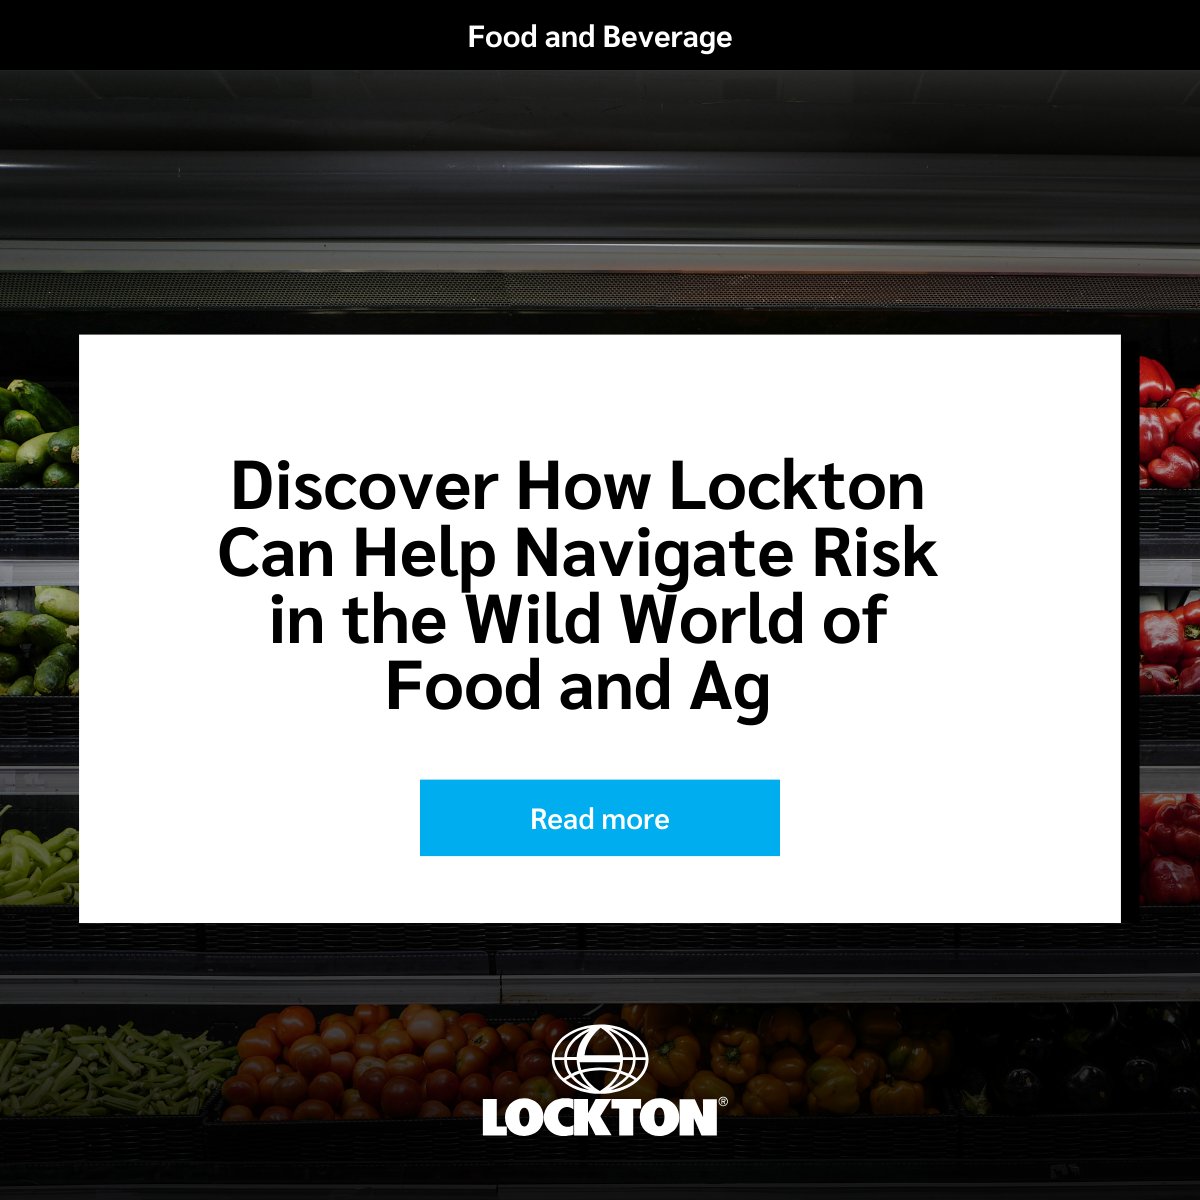 From inflation to the war in Ukraine, the food and agriculture industry faces tough challenges. To take on these risks, operators need innovative tools and the right partner. lockton.global/46B5jMg